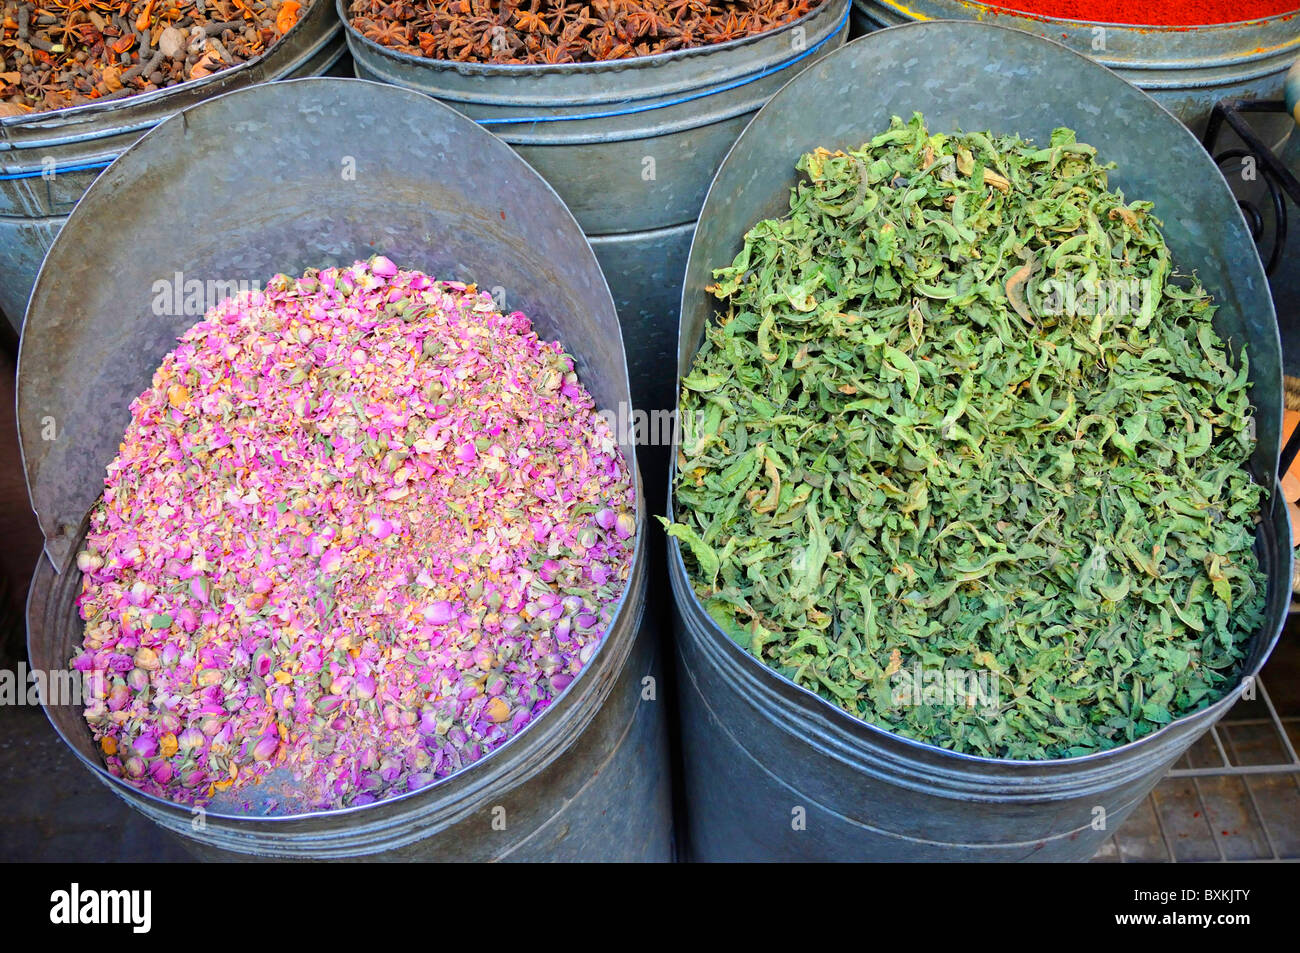 Dried roses and herbs in metal drums for sale in North Medina market in Marrakech Stock Photo